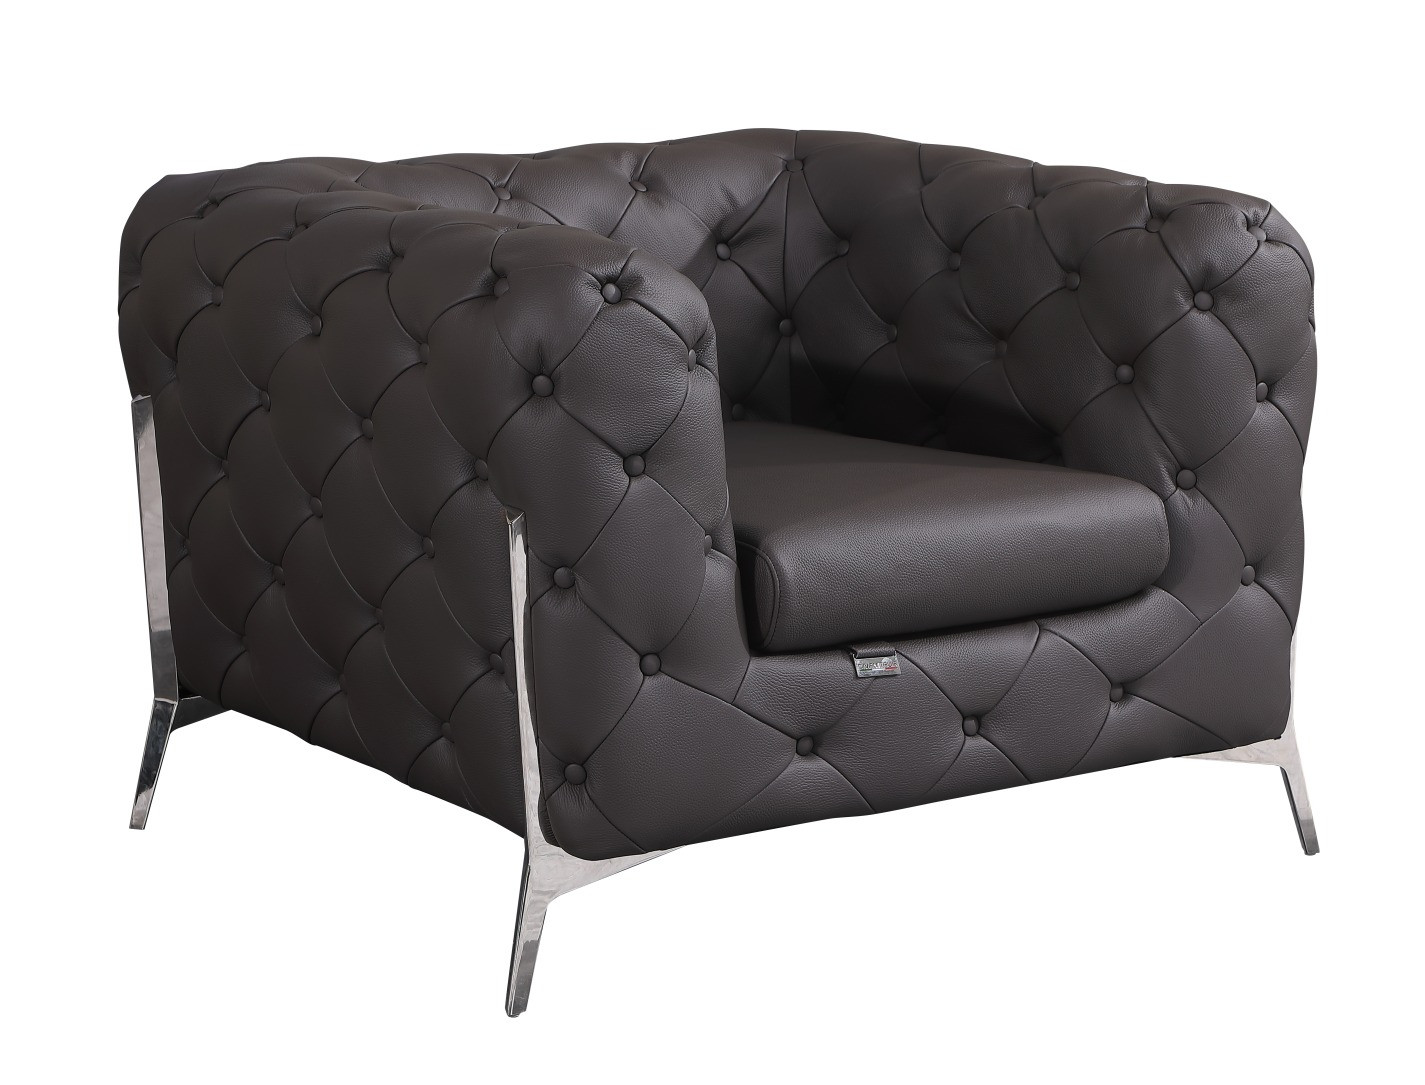 Glam Espresso Brown and Chrome Tufted Leather Armchair